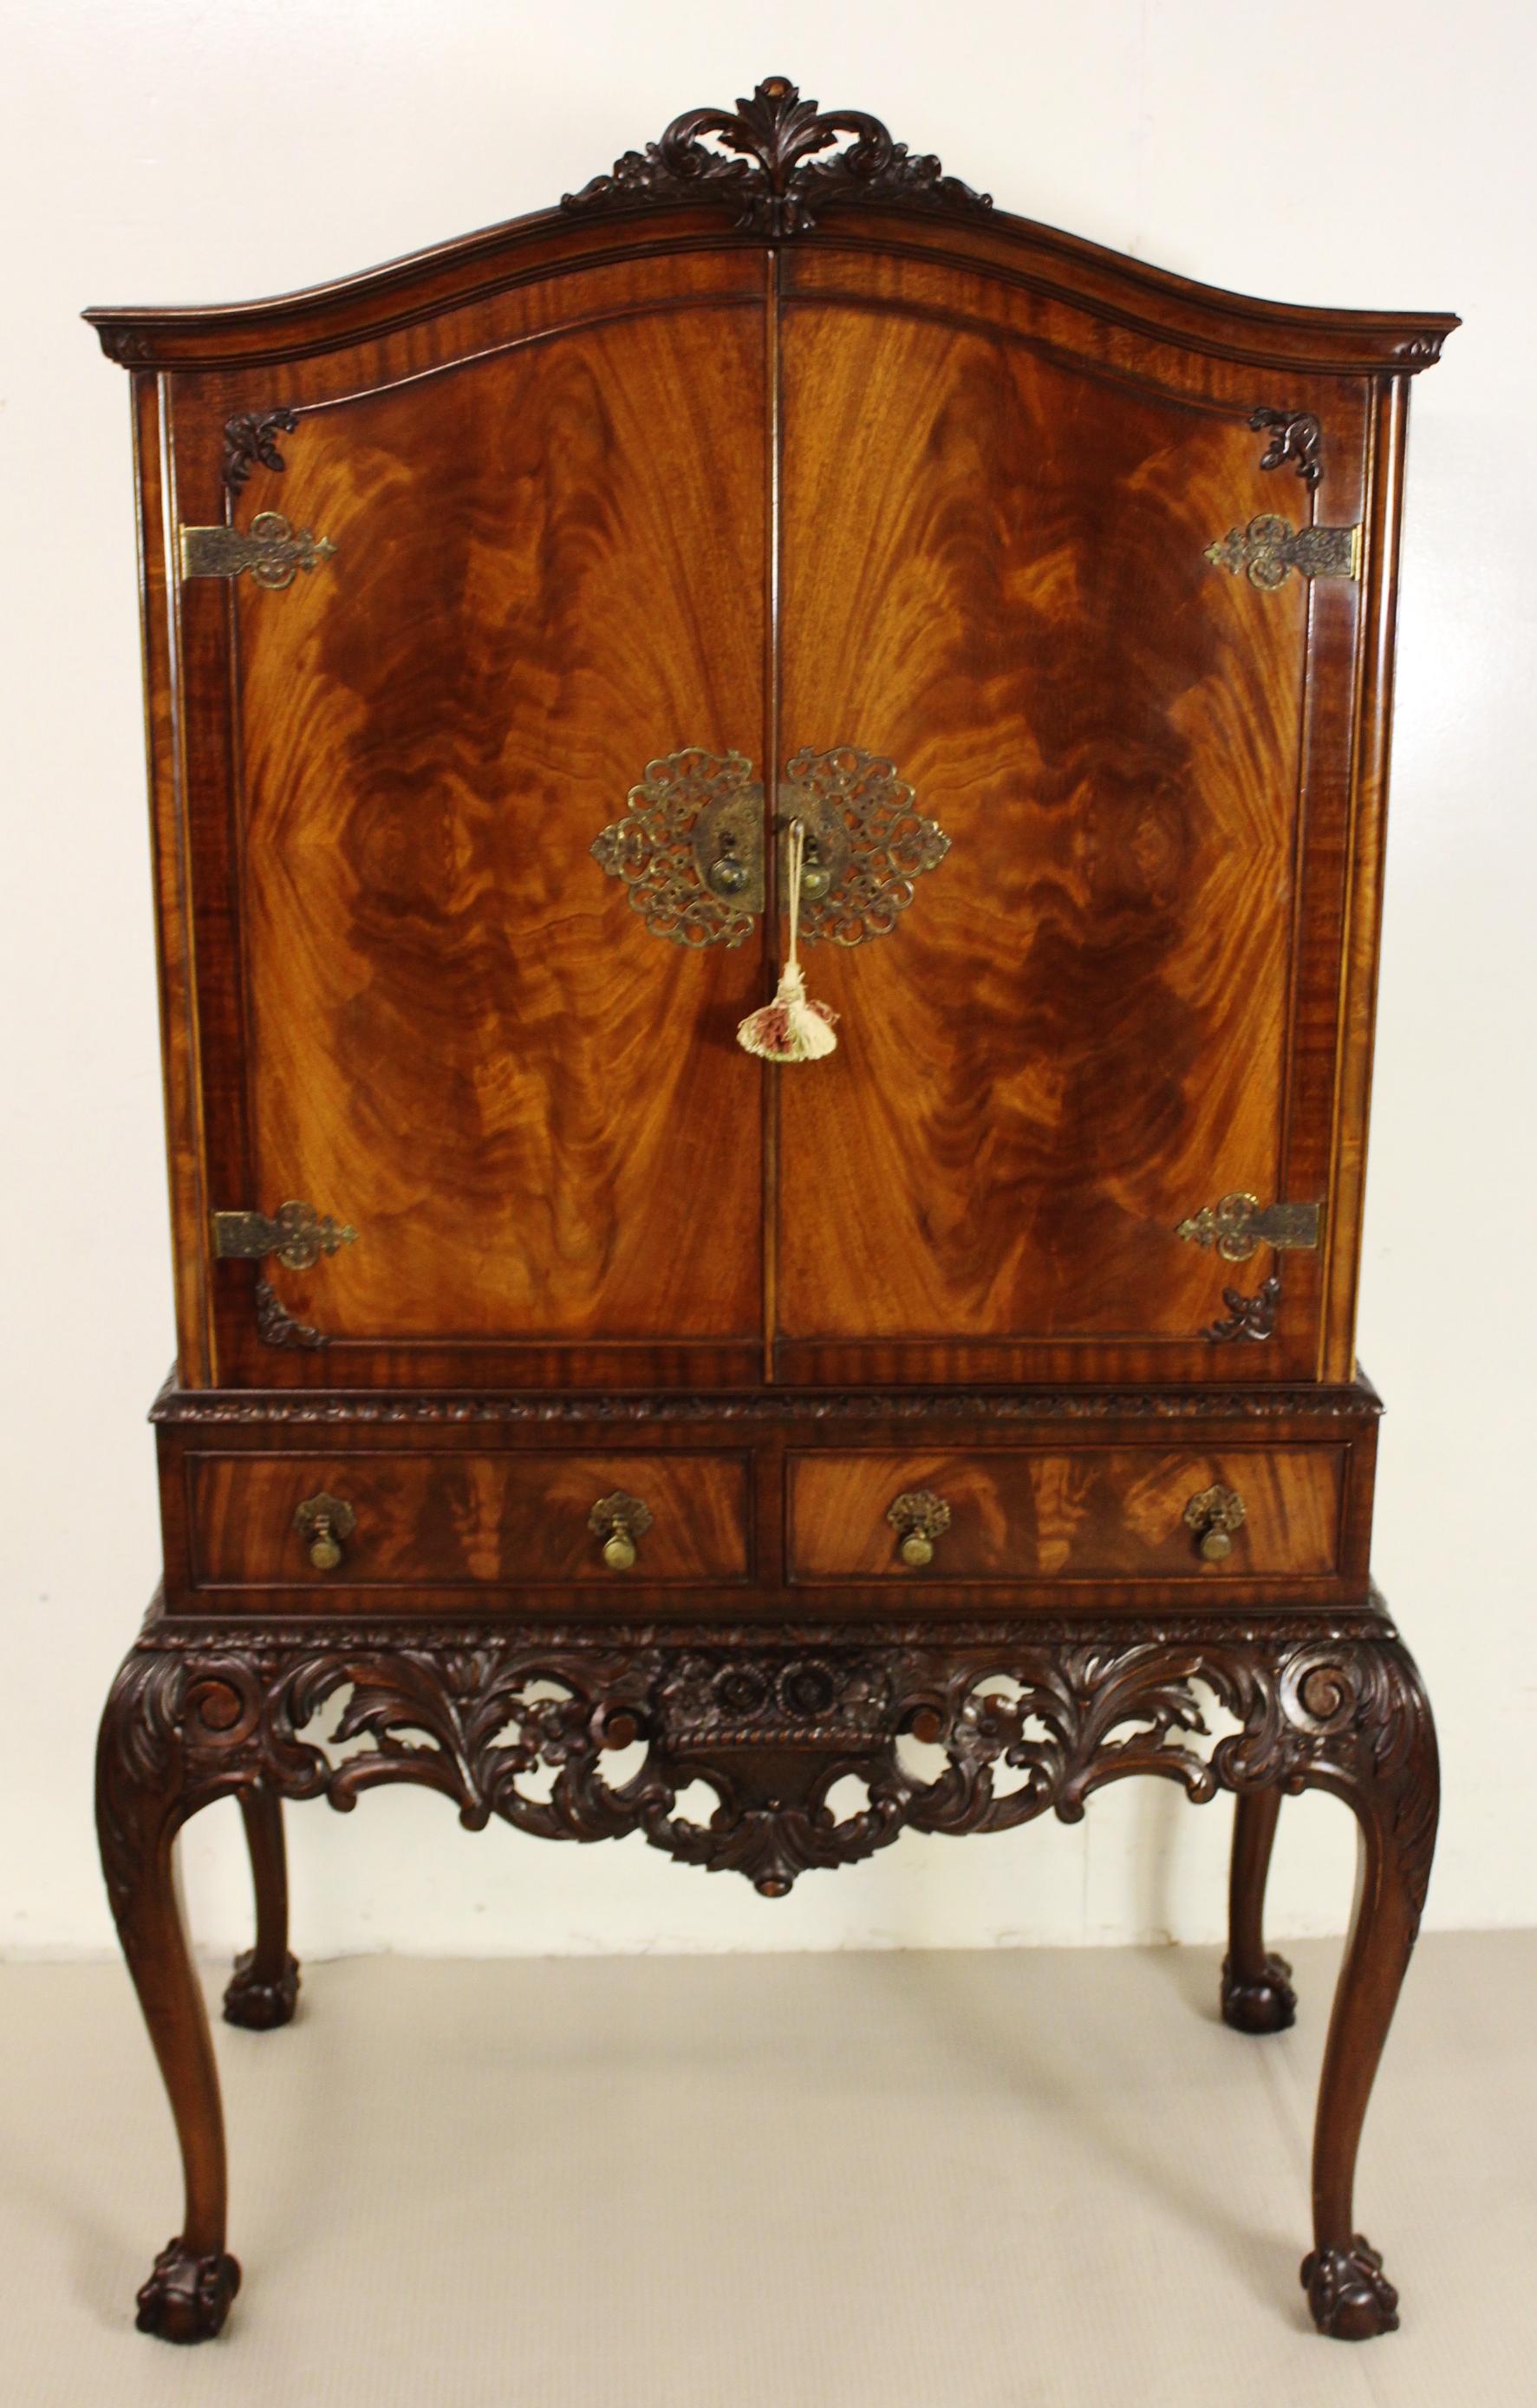 A stunning cocktail, or drinks, cabinet in flame mahogany. The domed top cabinet stands on an elaborately carved mahogany Stand. The cabinet is fitted with attractive flame mahogany veneers and is surmounted by a carved crest. There are elaborate